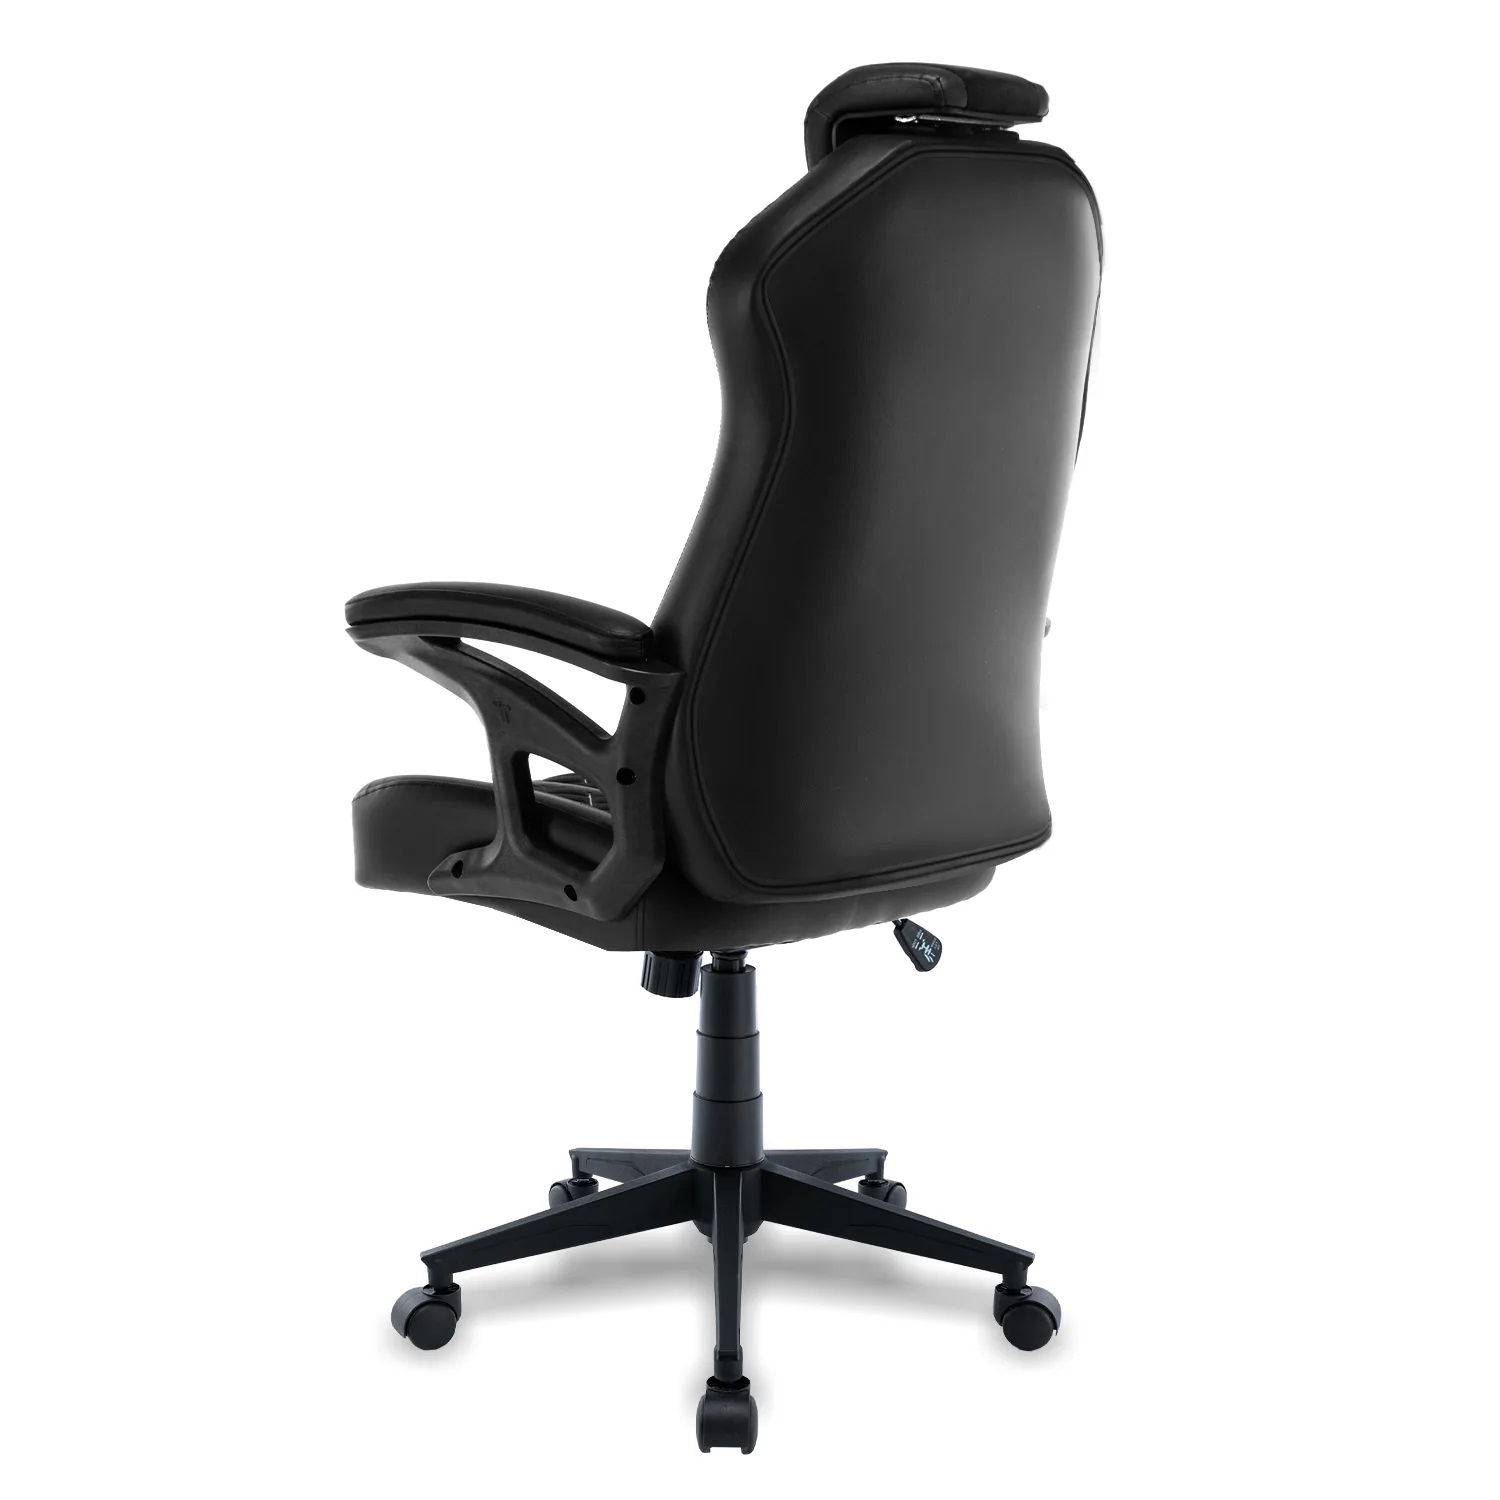 TTRacing Duo V4 Pro Gaming Chair Office Chair Kerusi Gaming - 2 Years Warranty (Black)